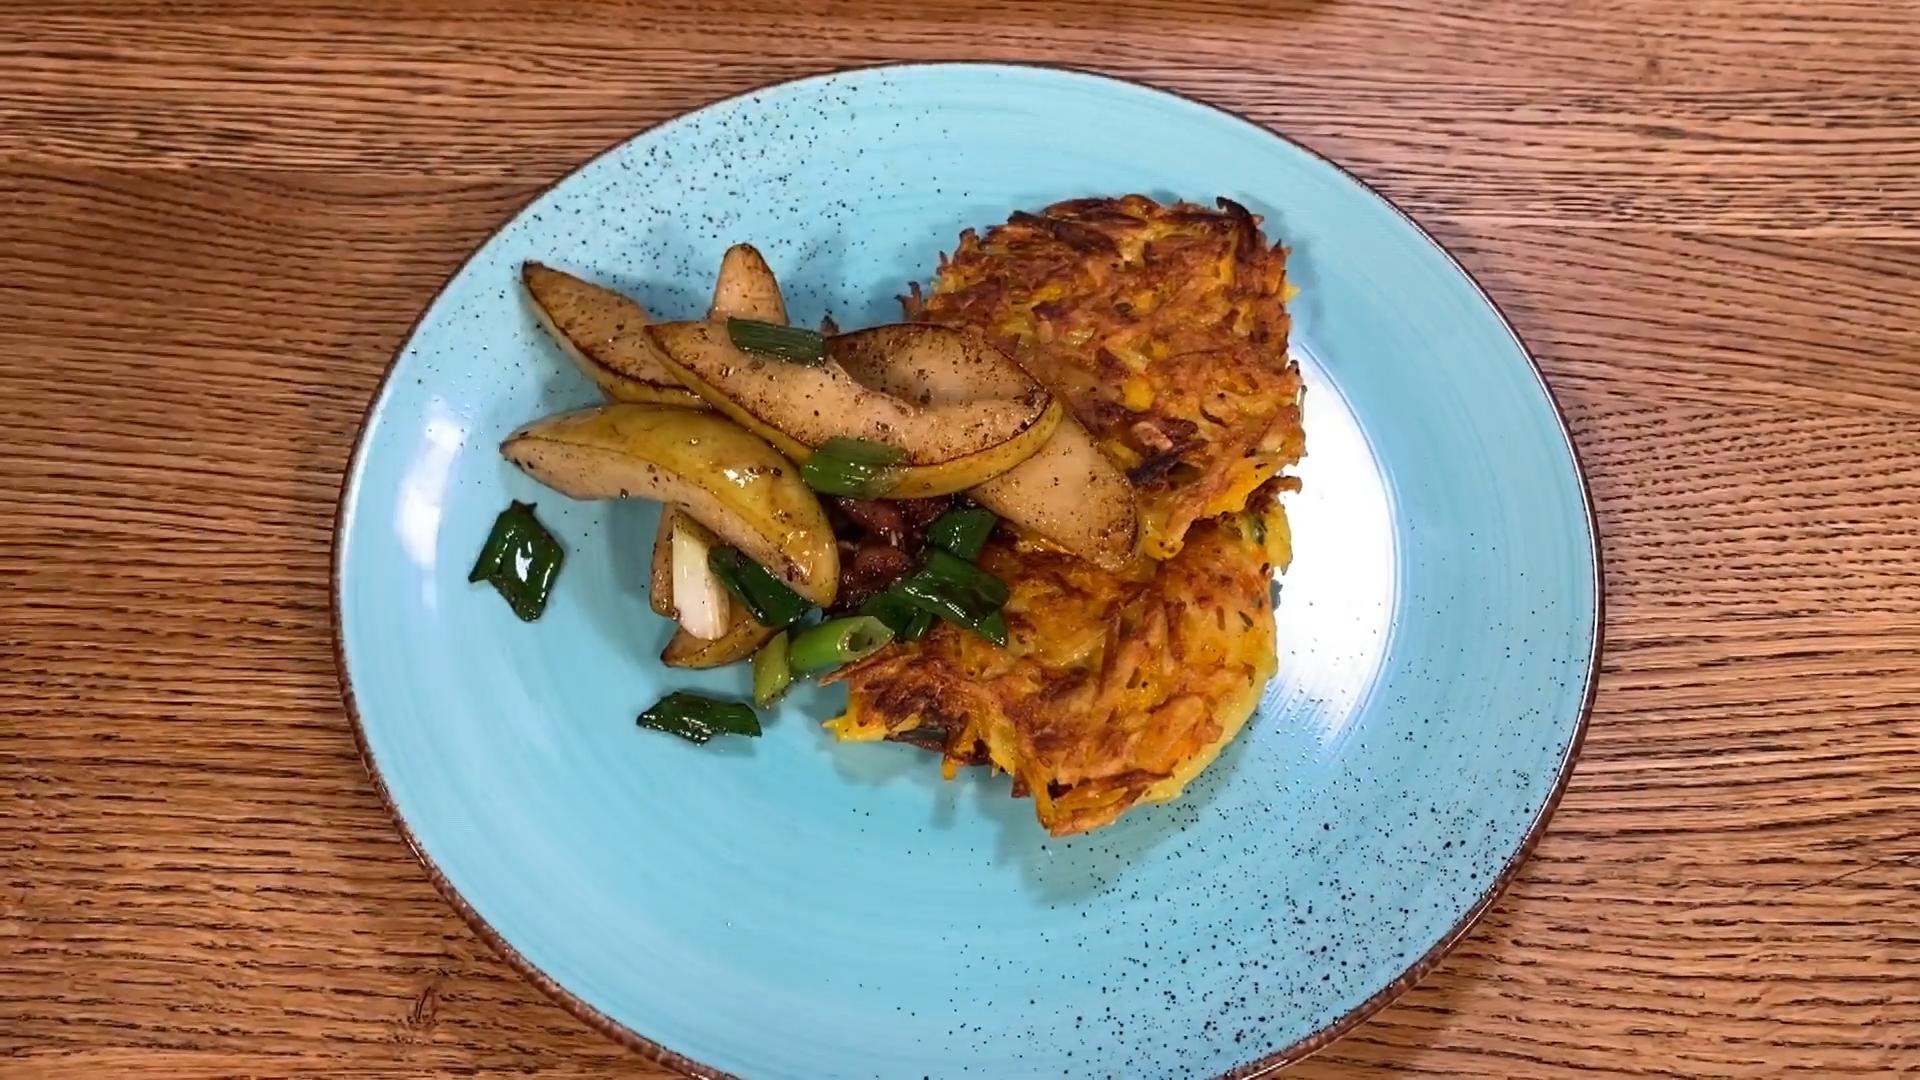 A quick number of Henssler's potato and pumpkin rösti with pear and bacon